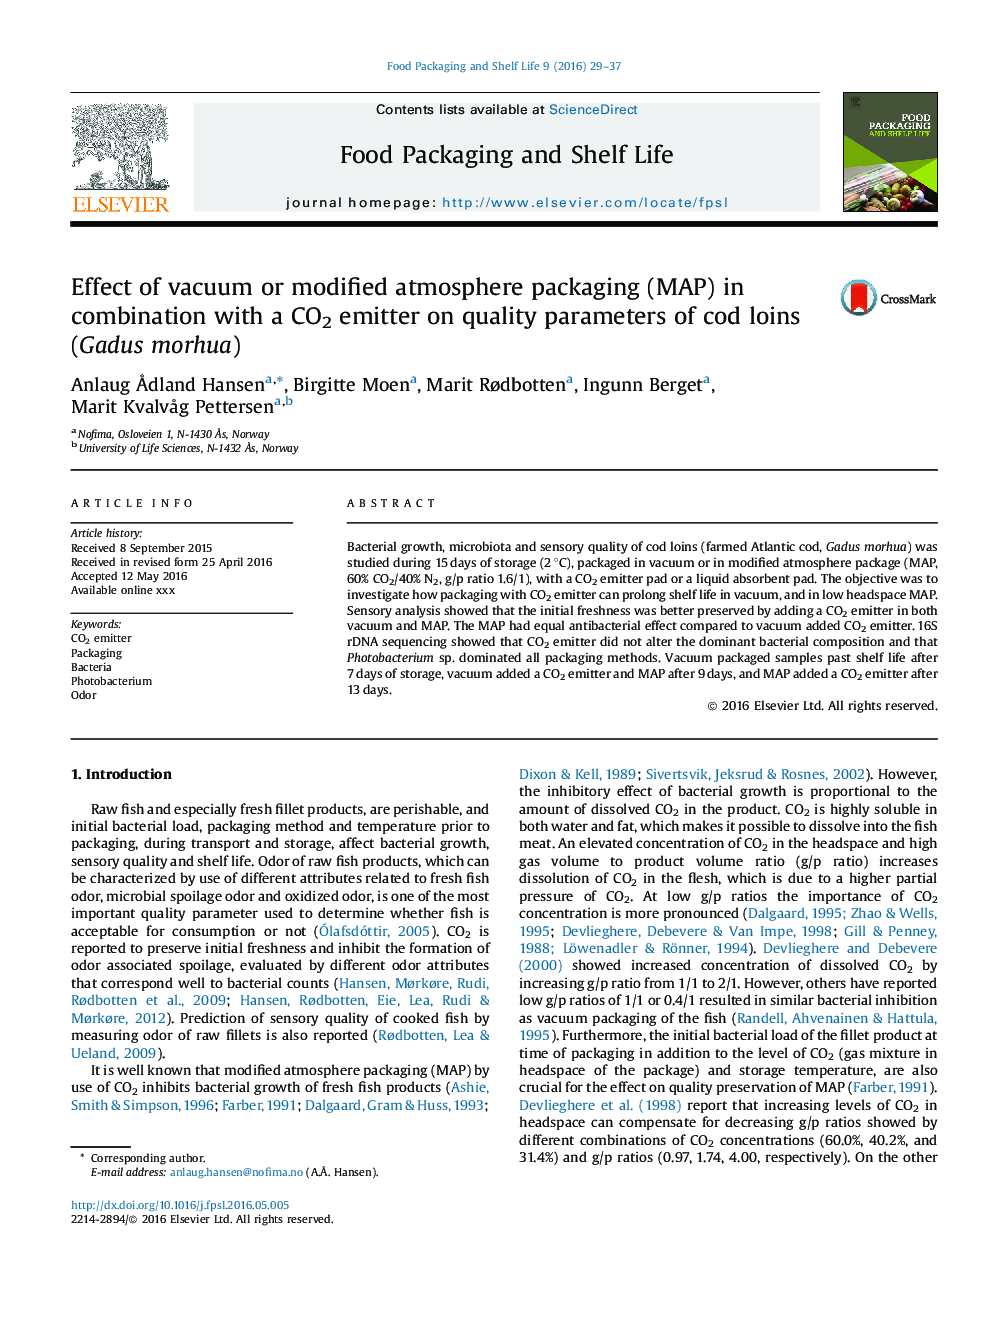 Effect of vacuum or modified atmosphere packaging (MAP) in combination with a CO2 emitter on quality parameters of cod loins (Gadus morhua)